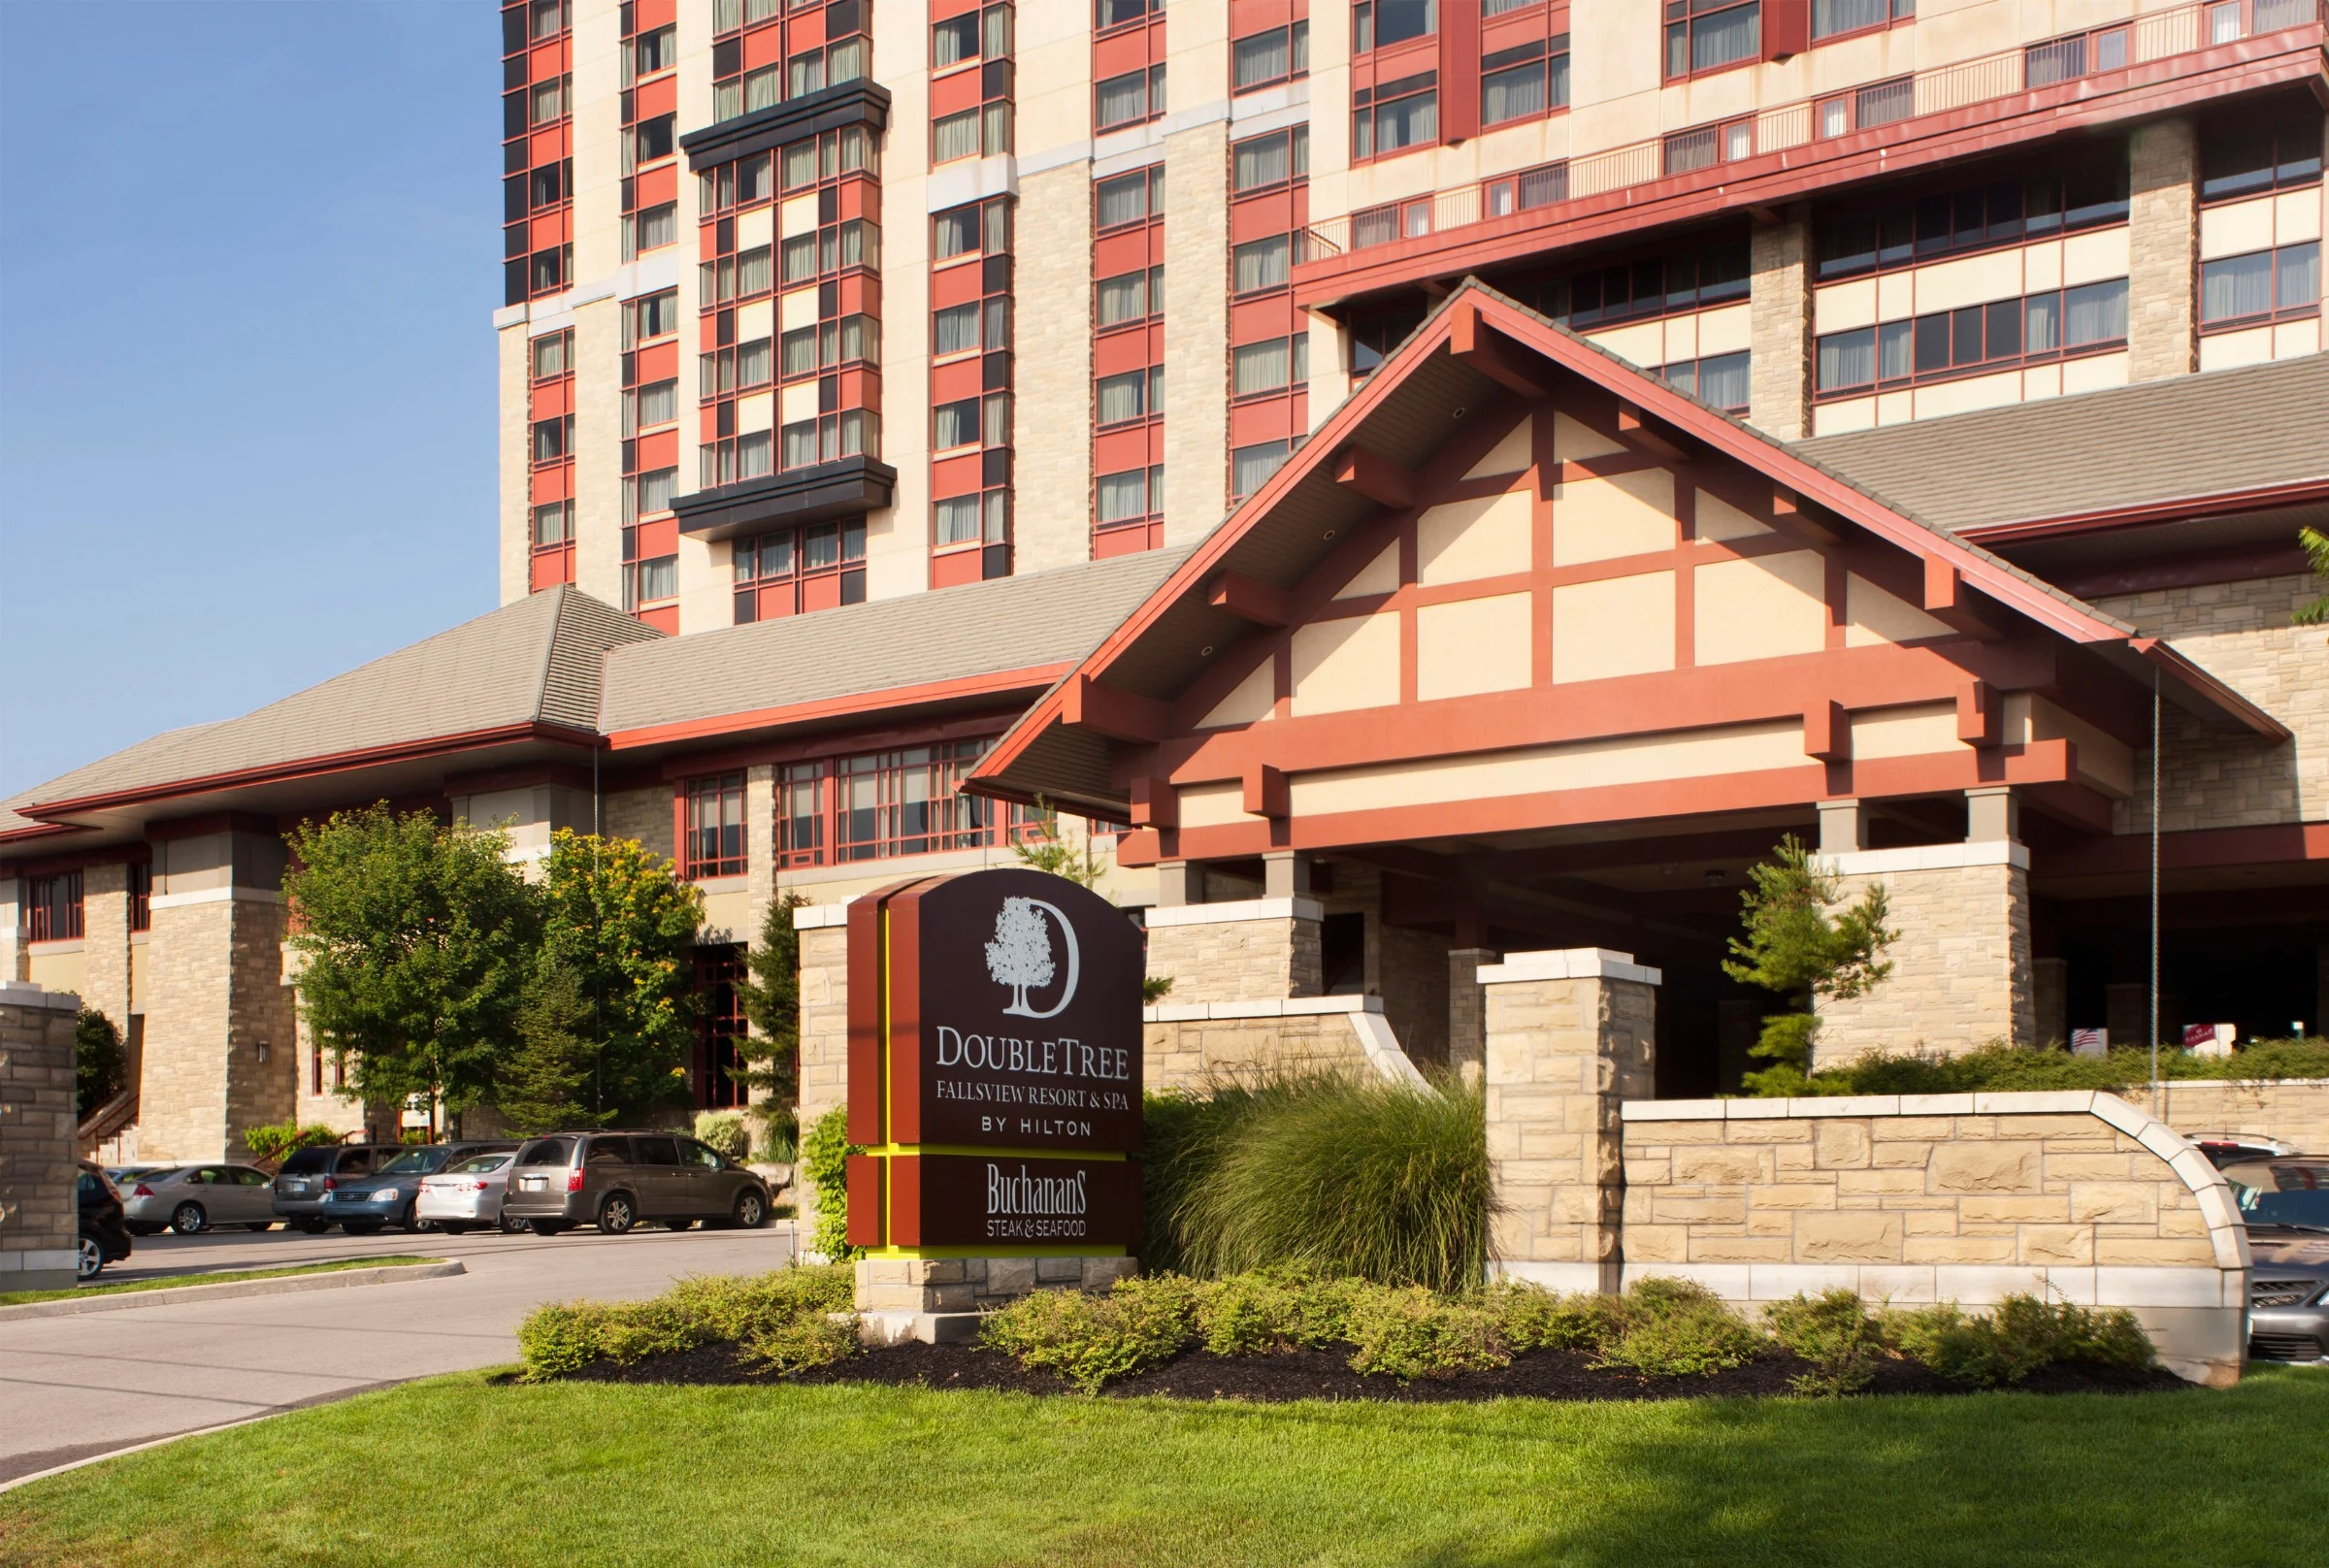 Best Hotels in Niagara Falls The DoubleTree Fallsview Resort and Spa by Hilton